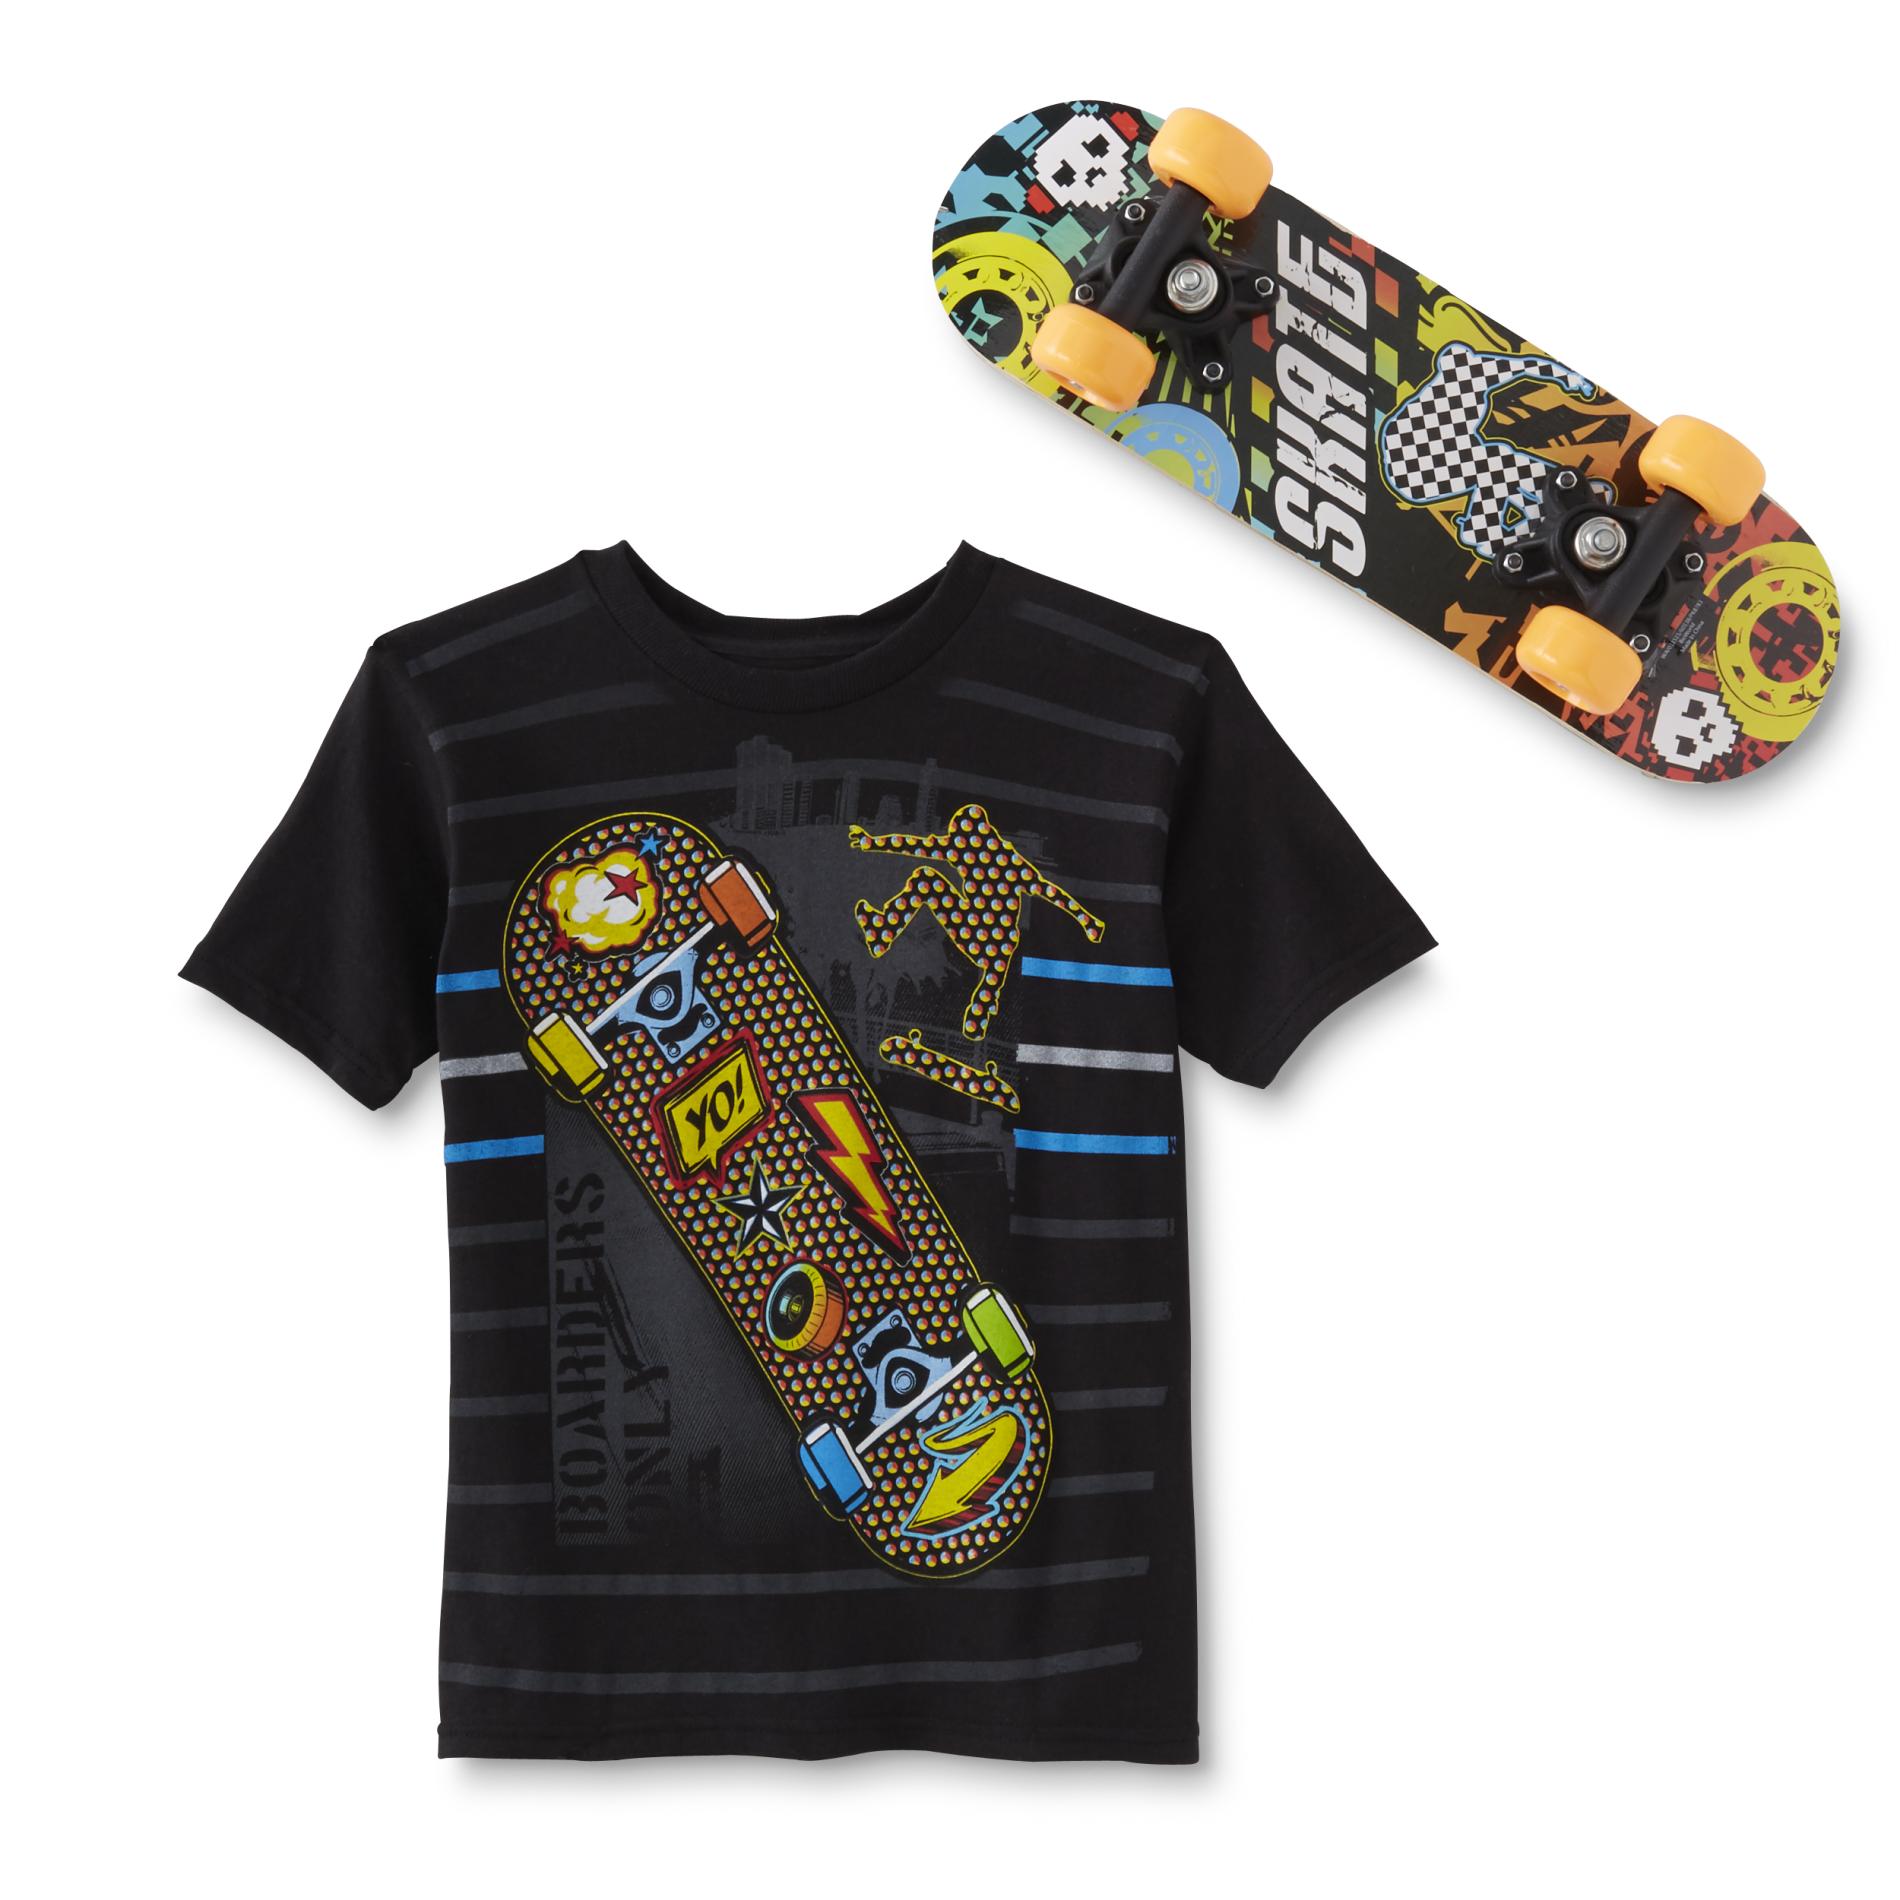 Boy's Graphic T-Shirt & Toy